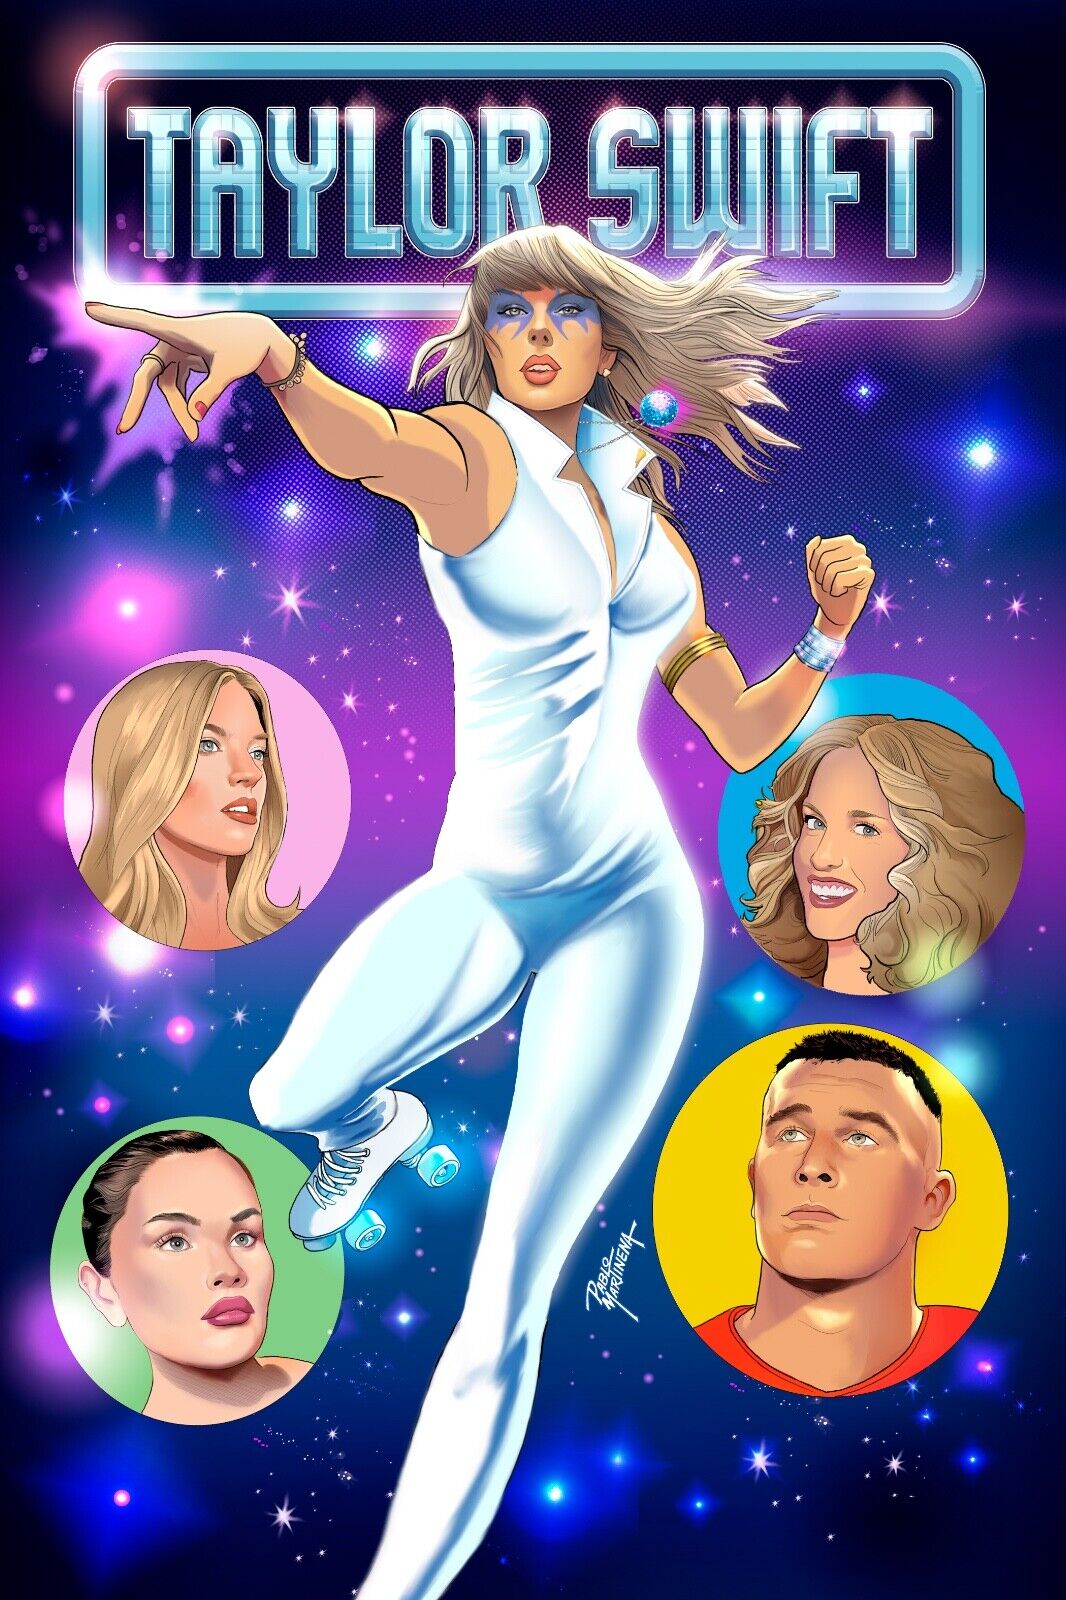 Female Force Taylor Swift comic book SWIFTIES DAZZLER NEW VARIANT No Brand Logos